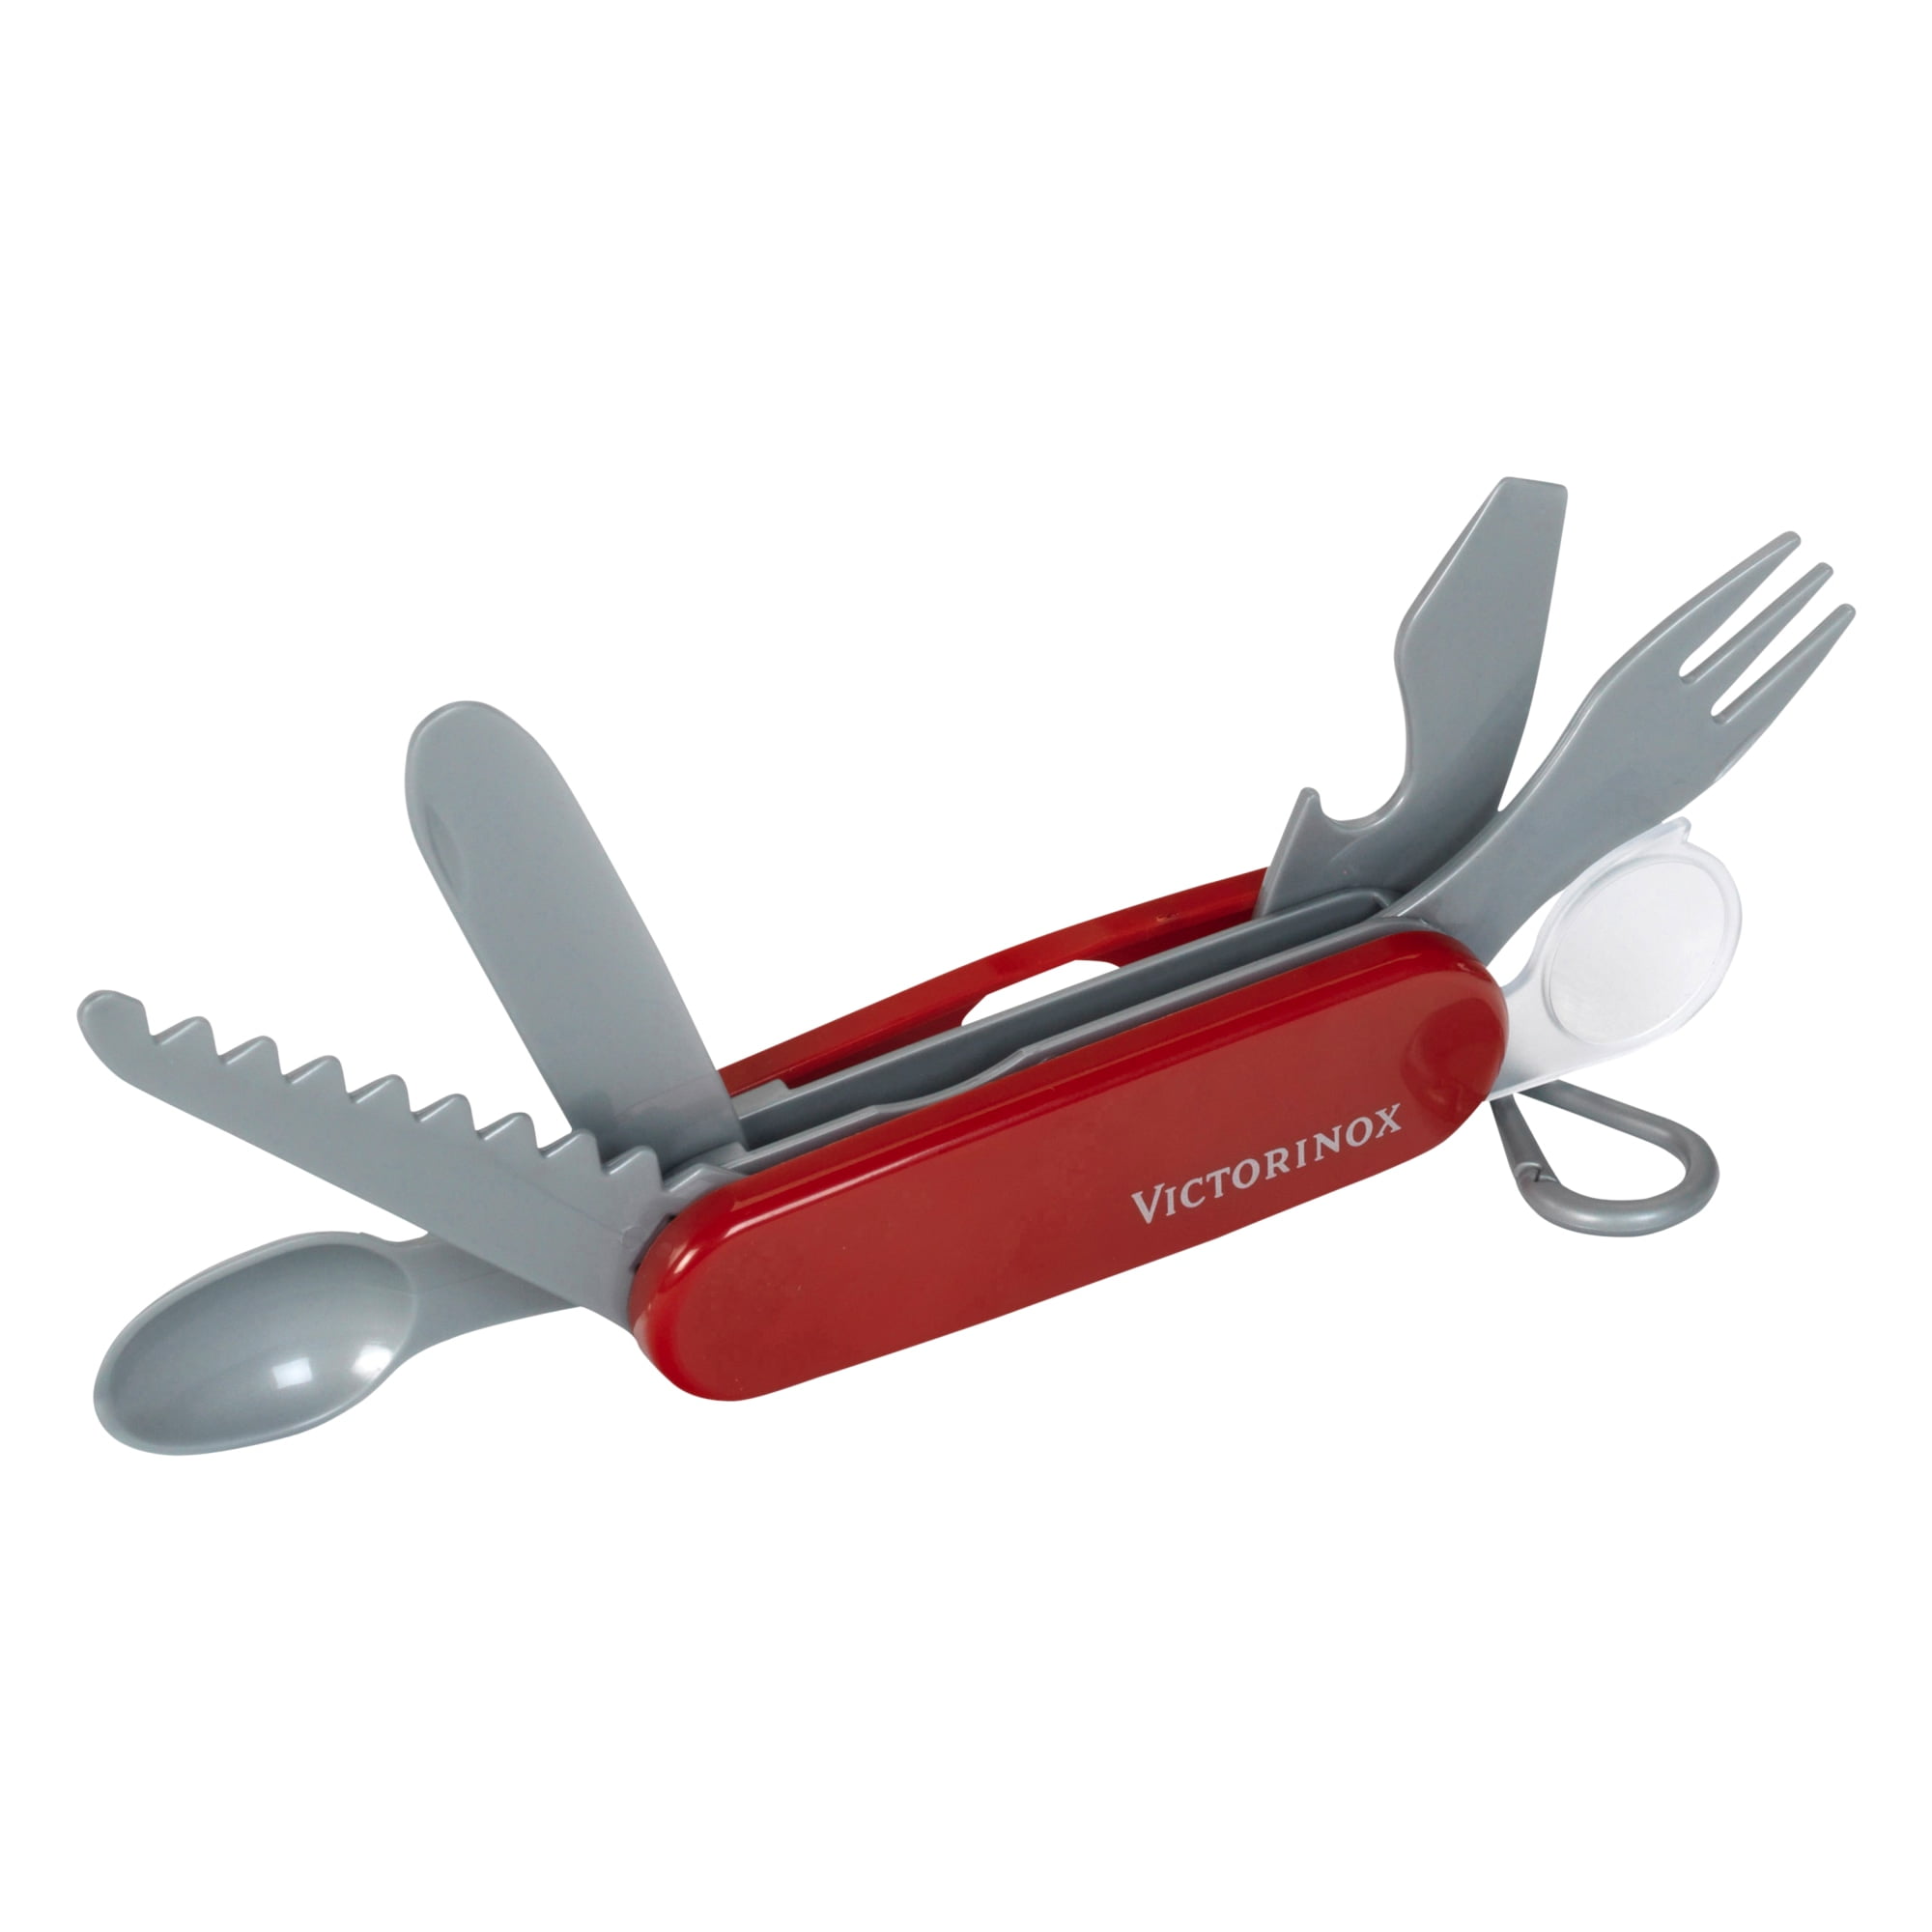 Klein: Victorinox: Swiss Army Knife - Pretend Play, 6 Tool Toy, Adventurer Indoor/Outdoor Tool, Stainless Steel, Great For Camping & Learning Proper Tool Safety, Ages 3+ - Walmart.com